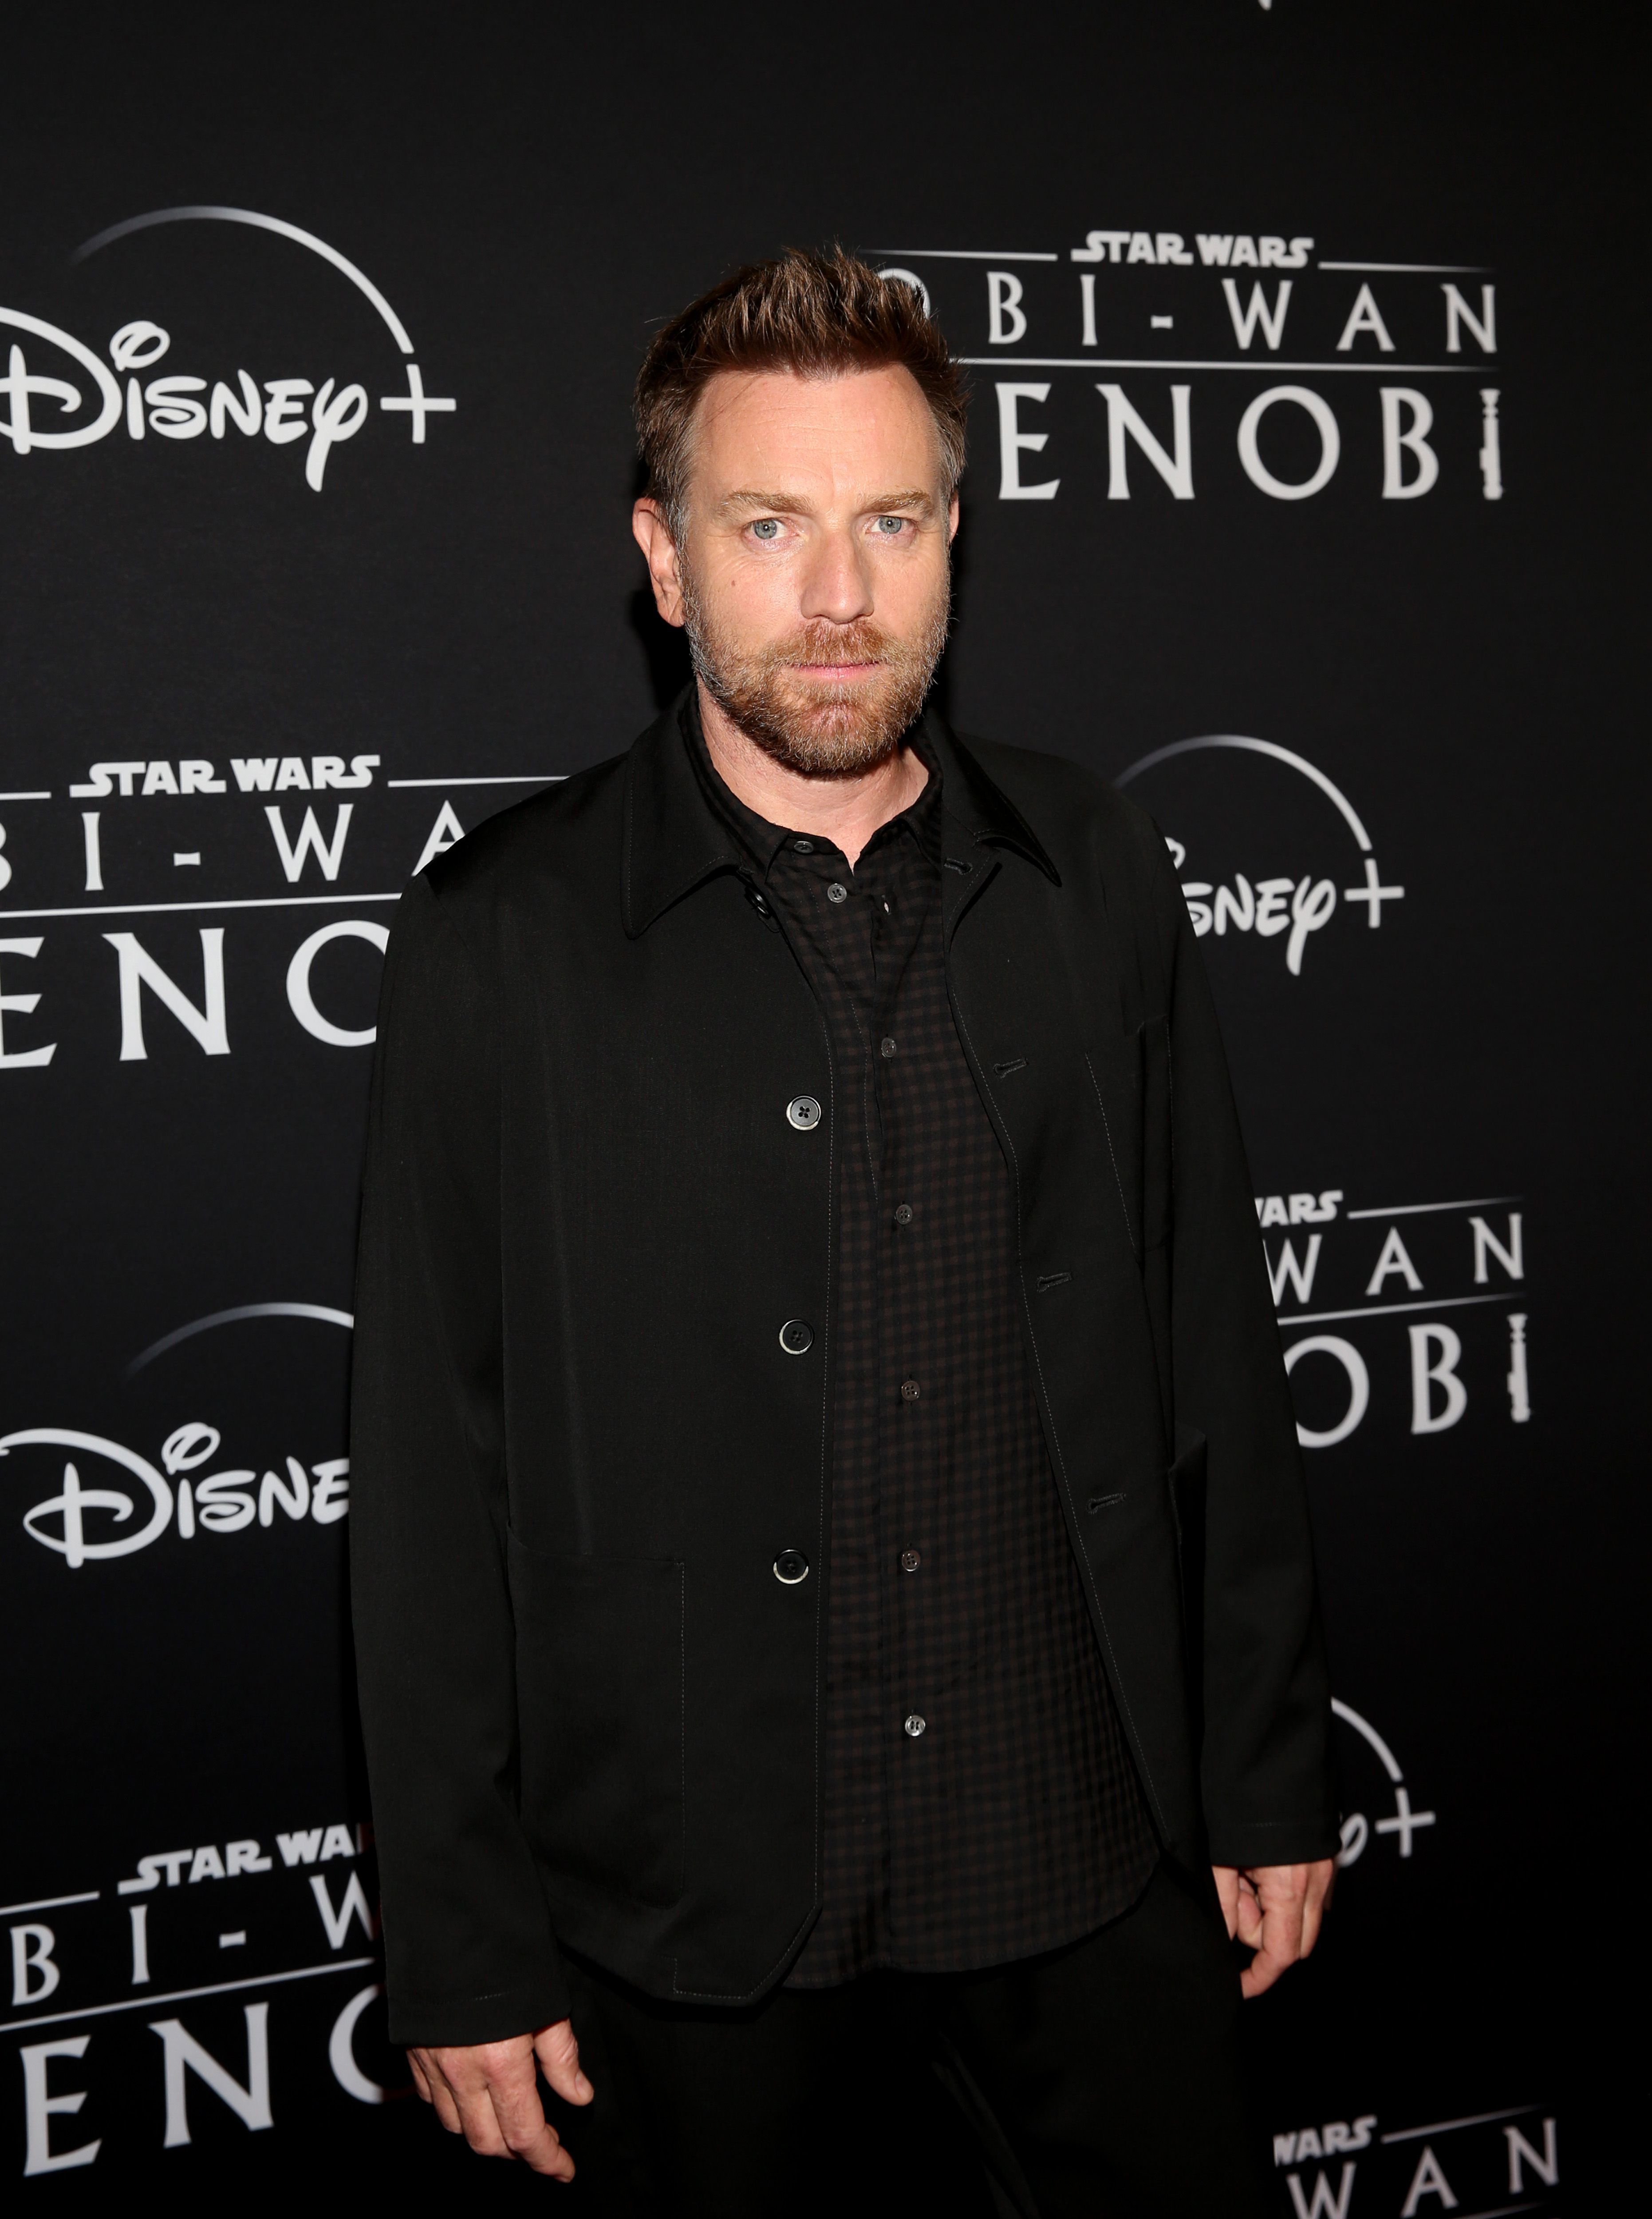 Ewan McGregor attends a surprise premiere of the first two episodes of “Obi-Wan Kenobi” at Star Wars Celebration in Anaheim, California on May 26th. | Source: Getty Images